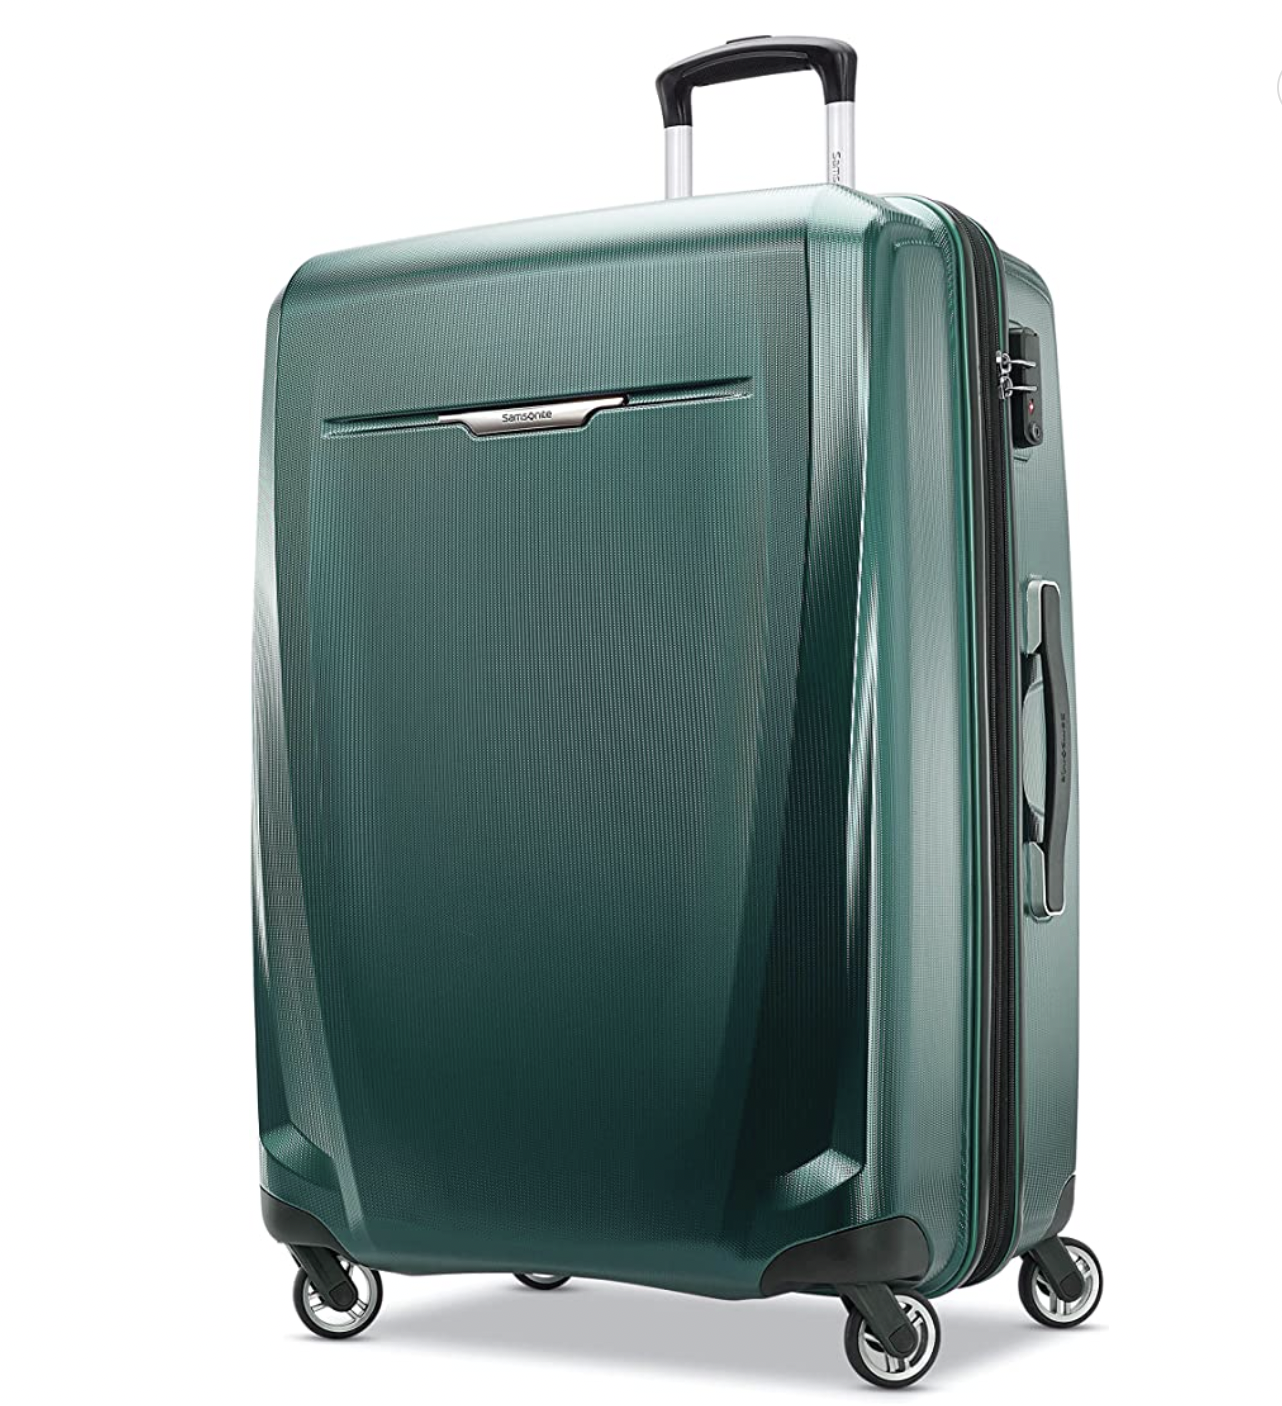 <p><strong>$156.00</strong></p><p>Ahhh, a classic that even your mama loves. Samsonite has hard- and soft-shell spinners and compartmentalized bags that’ll make even the most type-A of travelers giddy.</p><ul><li><strong>Return policy</strong>: 90 days </li><li><strong>Warranty: </strong>10-year guarantee against defects in materials and workmanship.</li></ul><p><em><strong>THE REVIEWS:</strong> "Took this to Europe a month ago. This thing has cavernous storage! I thought I’d have to squeeze everything for a two-week trip in, but to my surprise, I had plenty of room," one reviewer writes. "Held up perfectly. The wheels work great and spin freely. Zippers we’re smooth and never had an issue. I was worried about how it would perform on the cobblestone streets in Rome, but it performed like a champ. Really happy with this purchase!"</em></p>